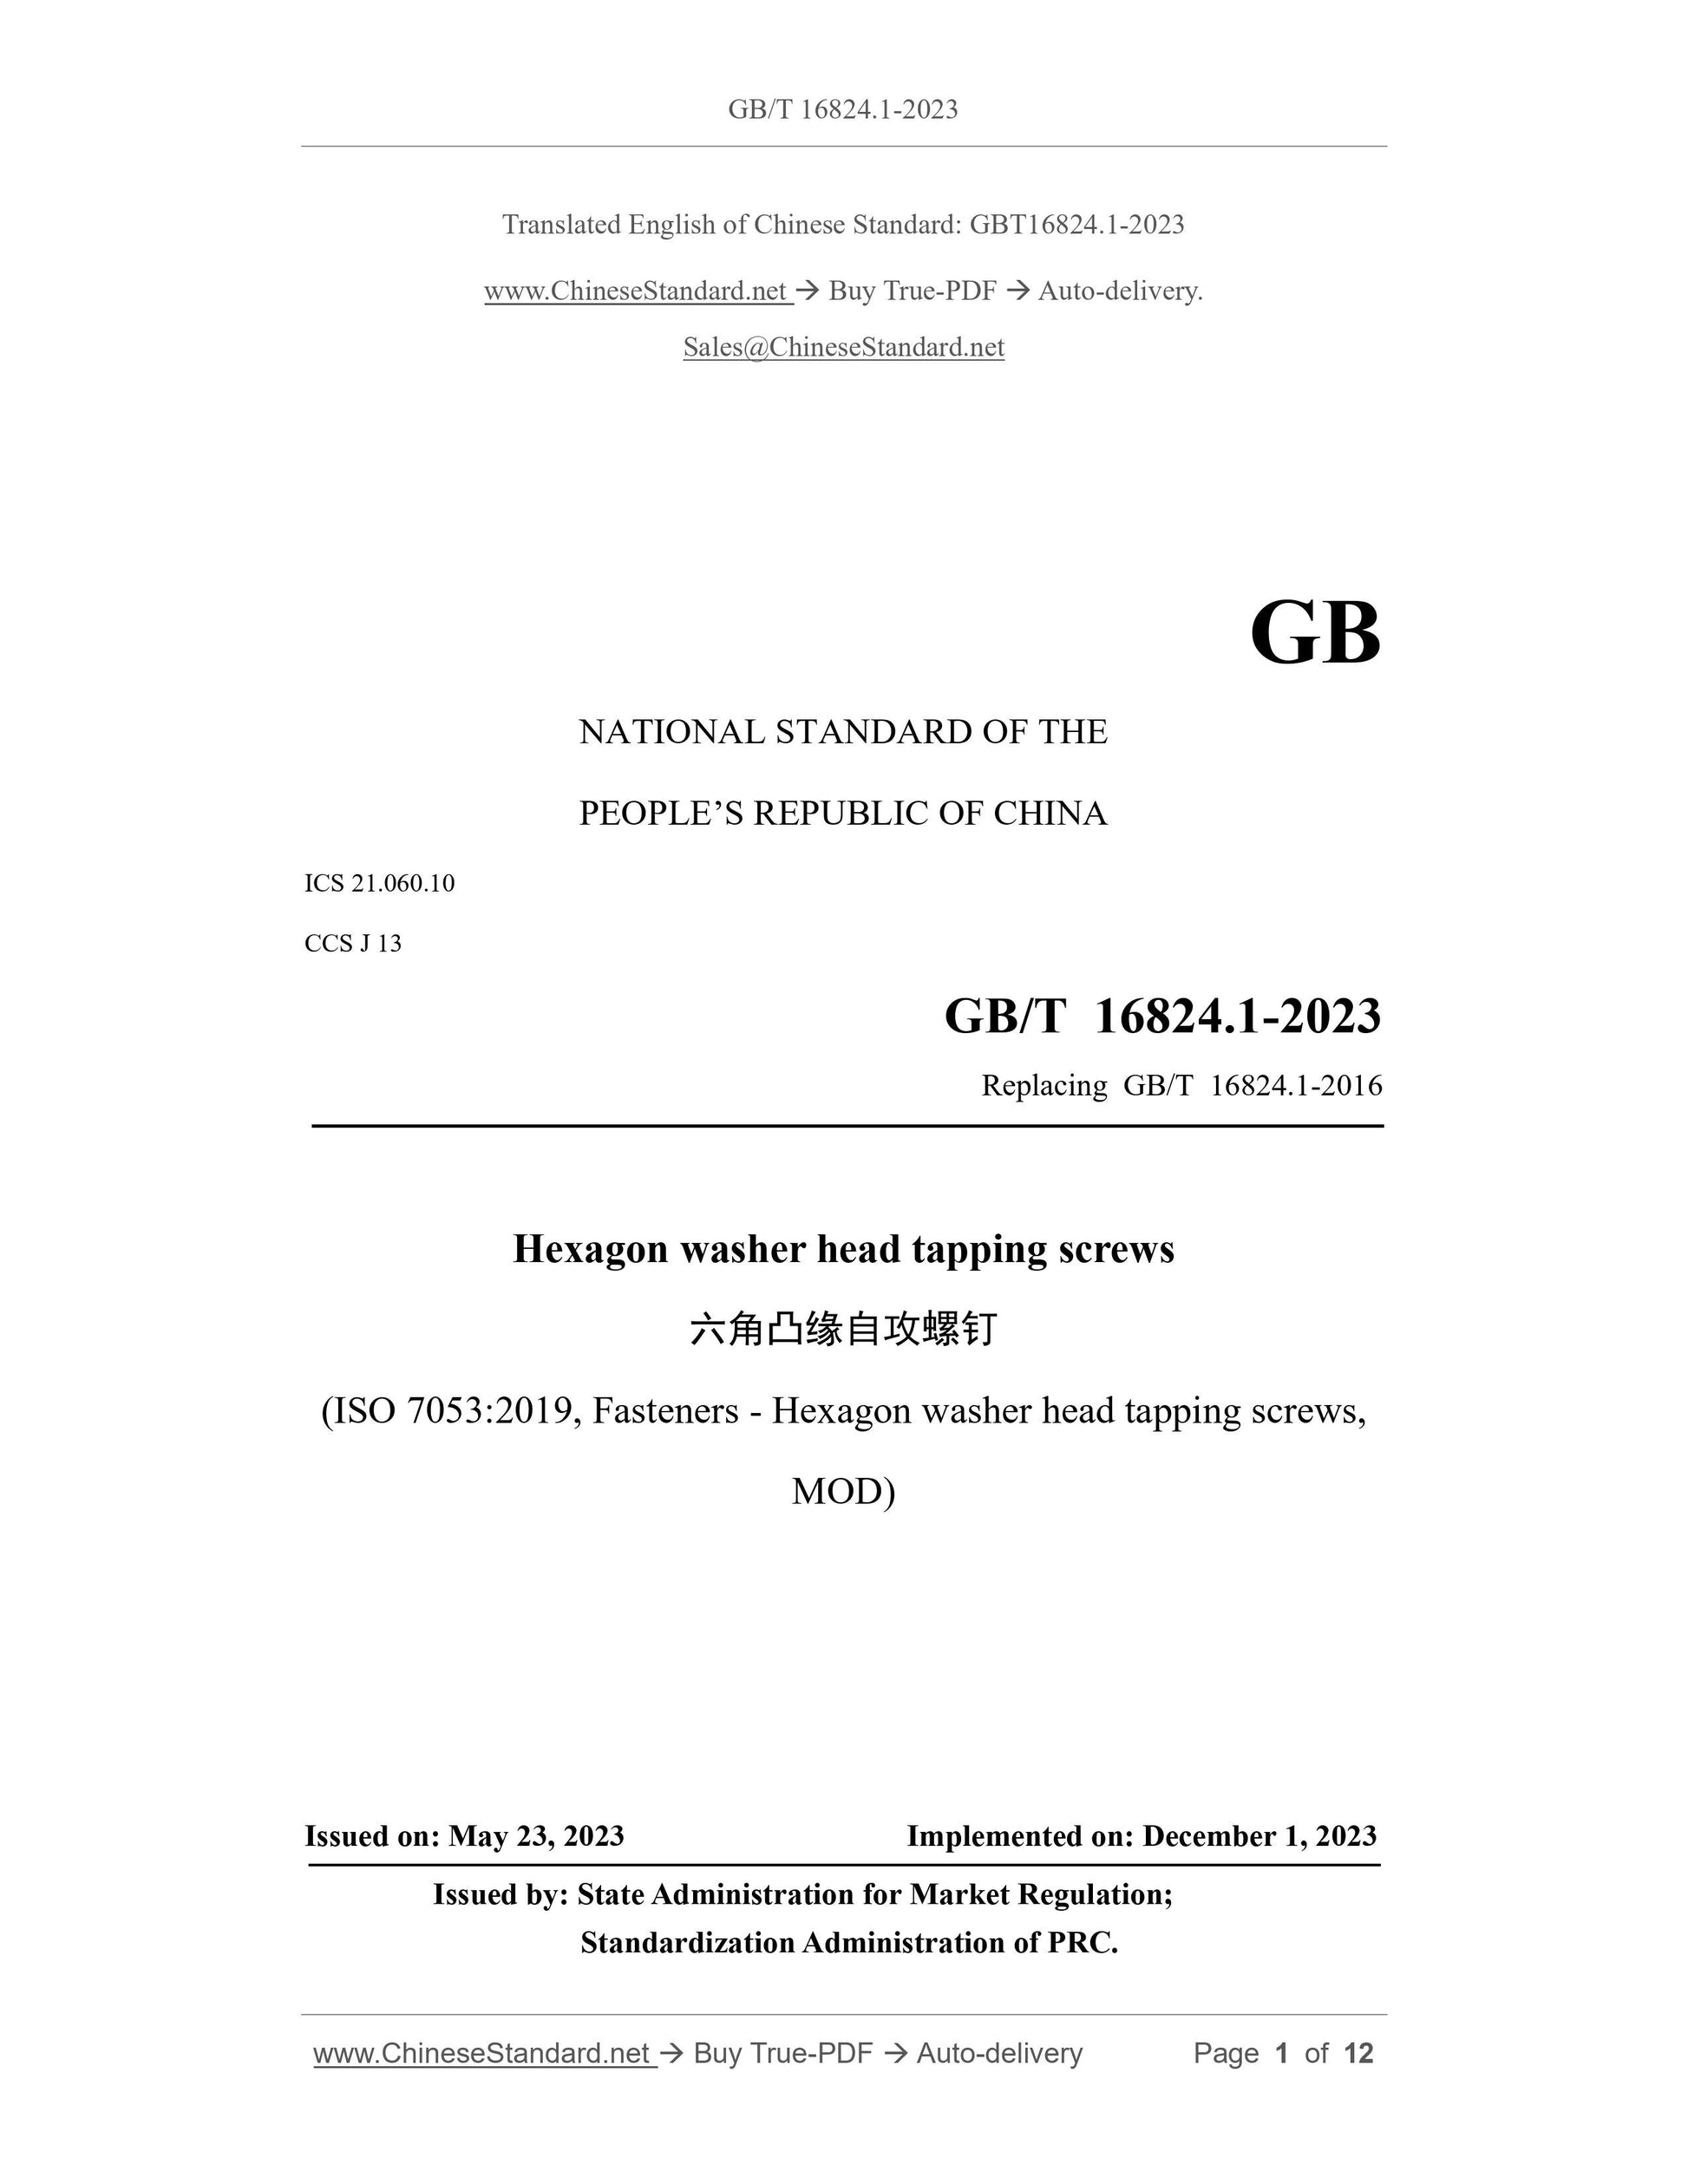 GB/T 16824.1-2023 Page 1